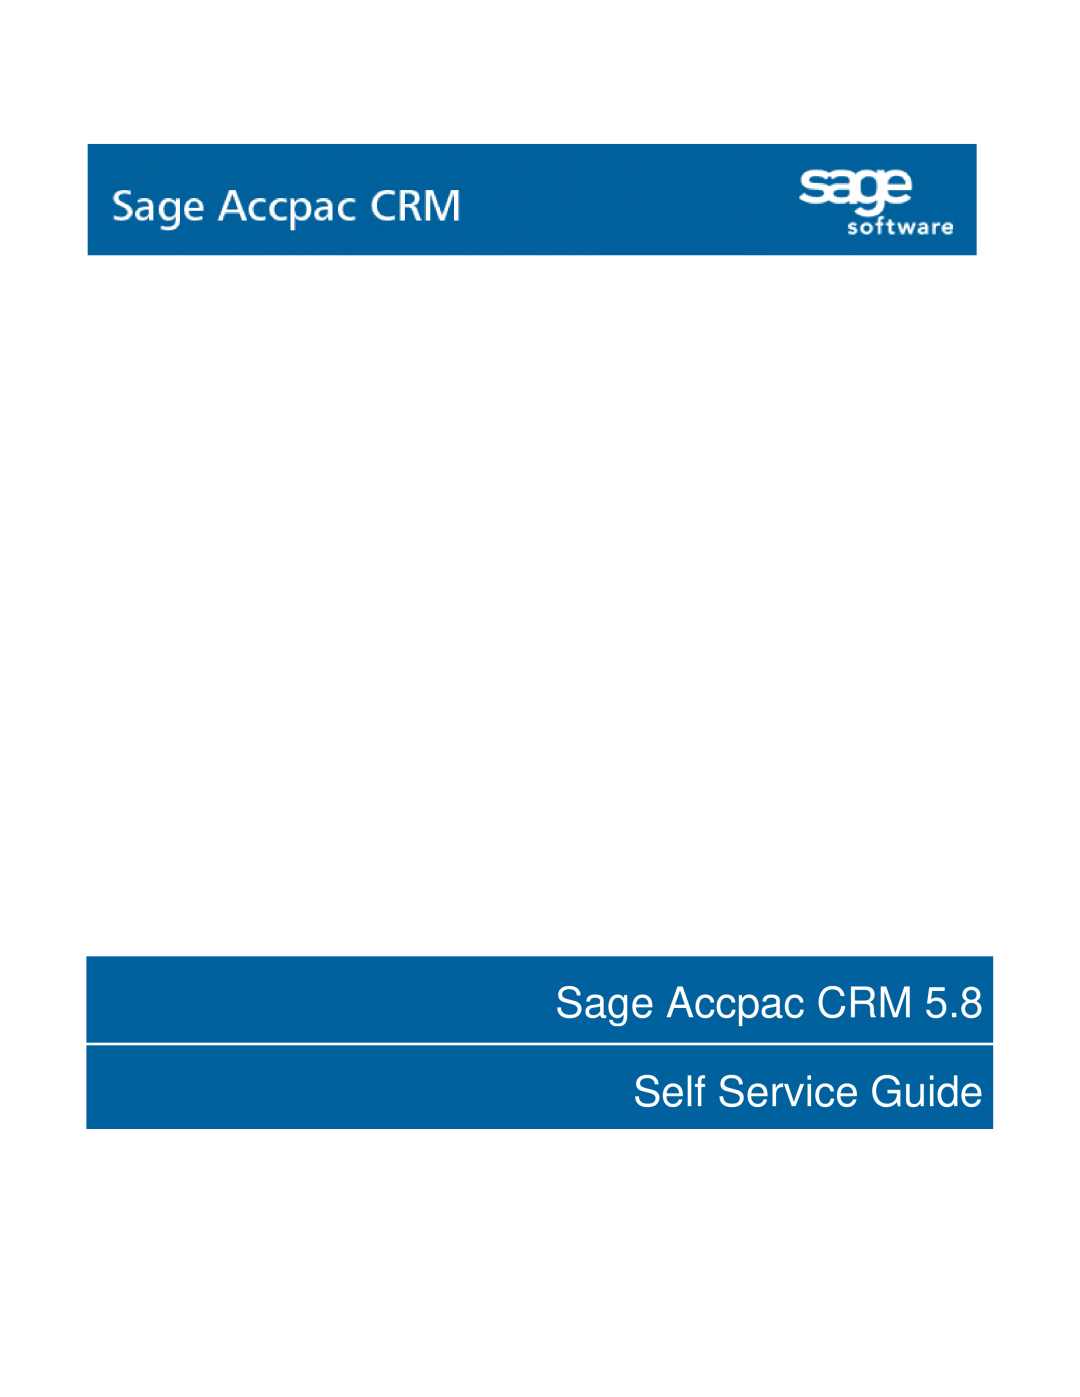 Sage Software 5.8 manual Sage Accpac CRM Self Service Guide 